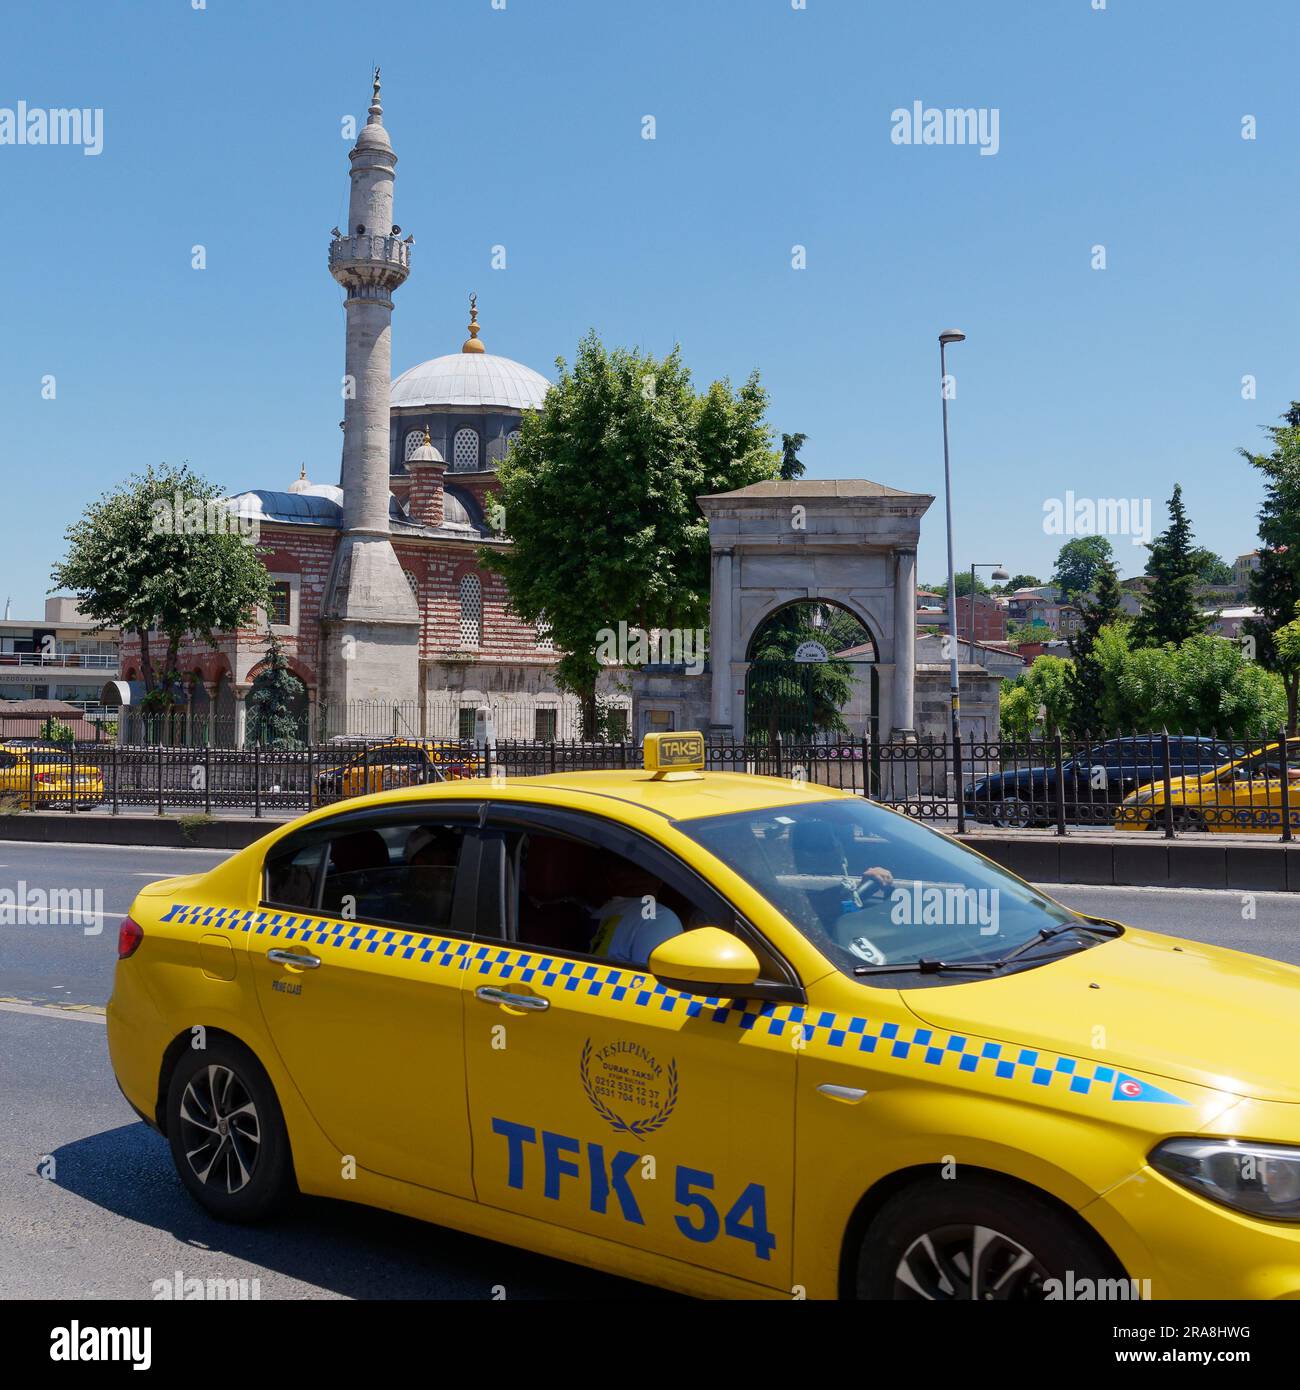 Yellow taxis on a road in front of a Mosque in Istanbul Turkey Stock Photo